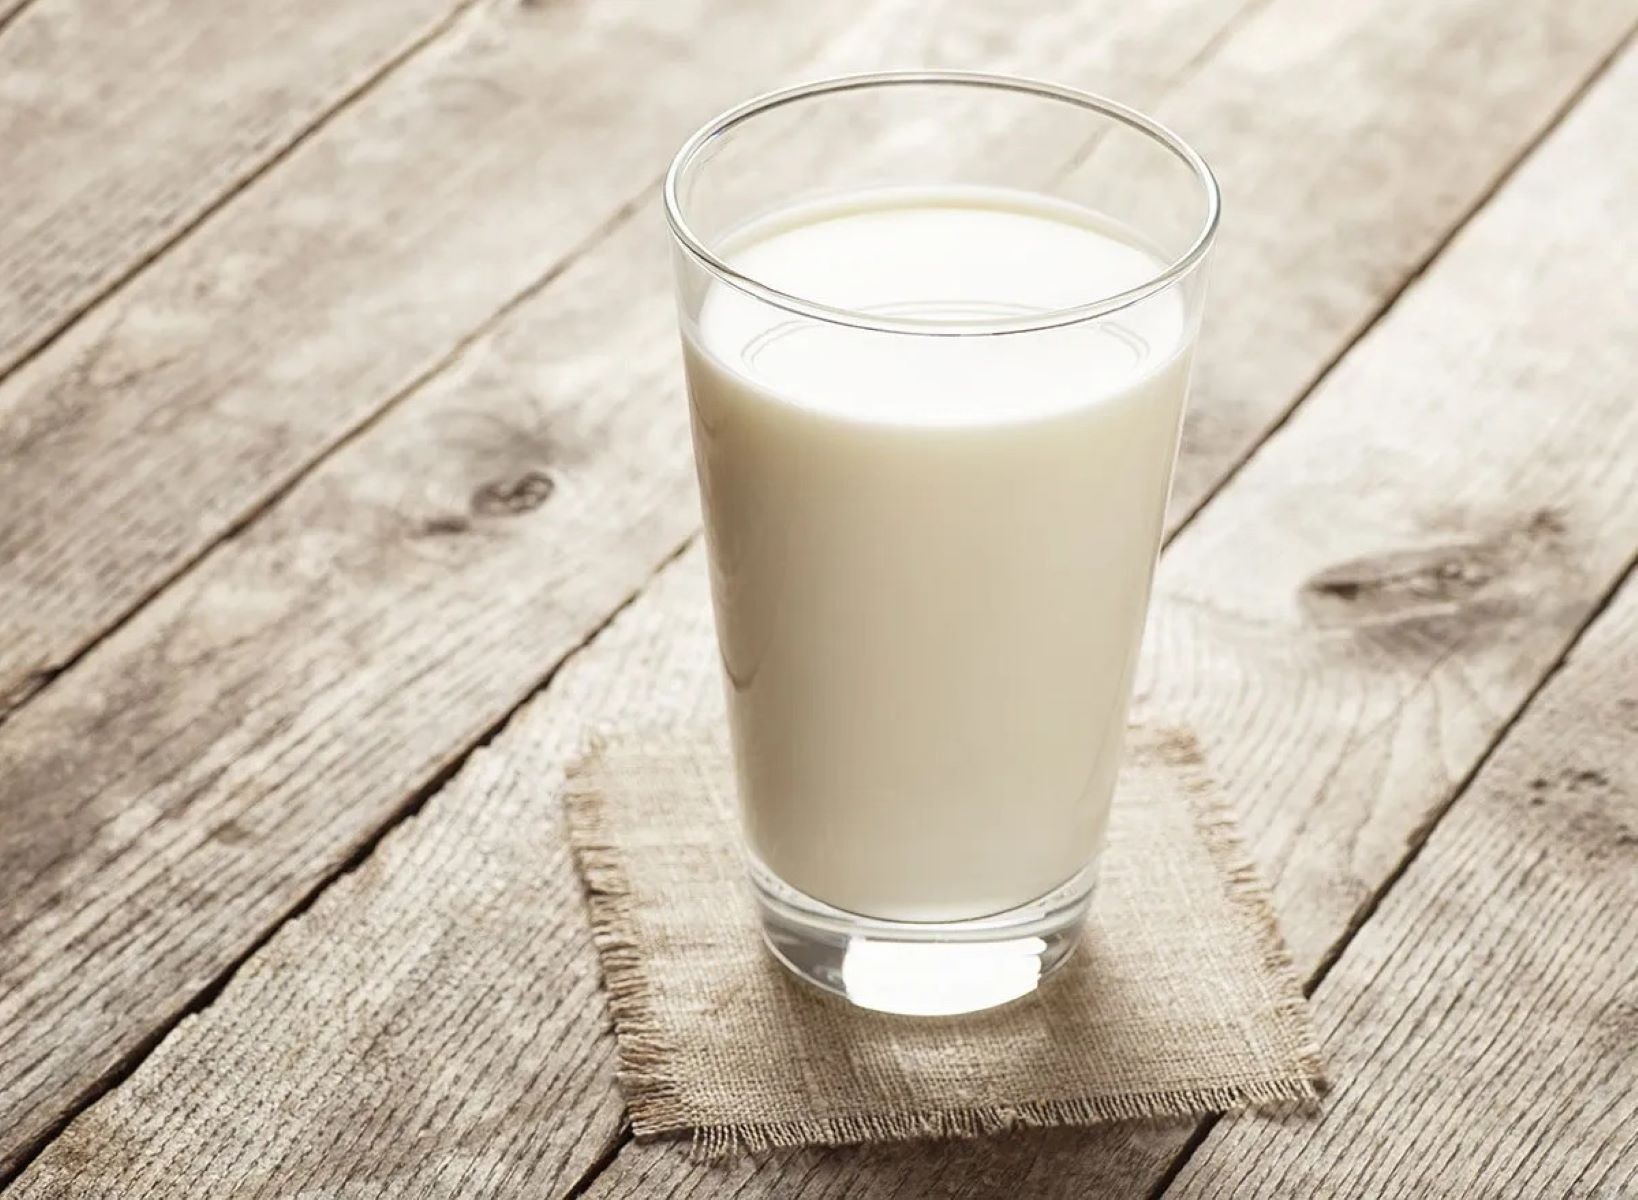 How Many Calories Is A Glass Of Milk